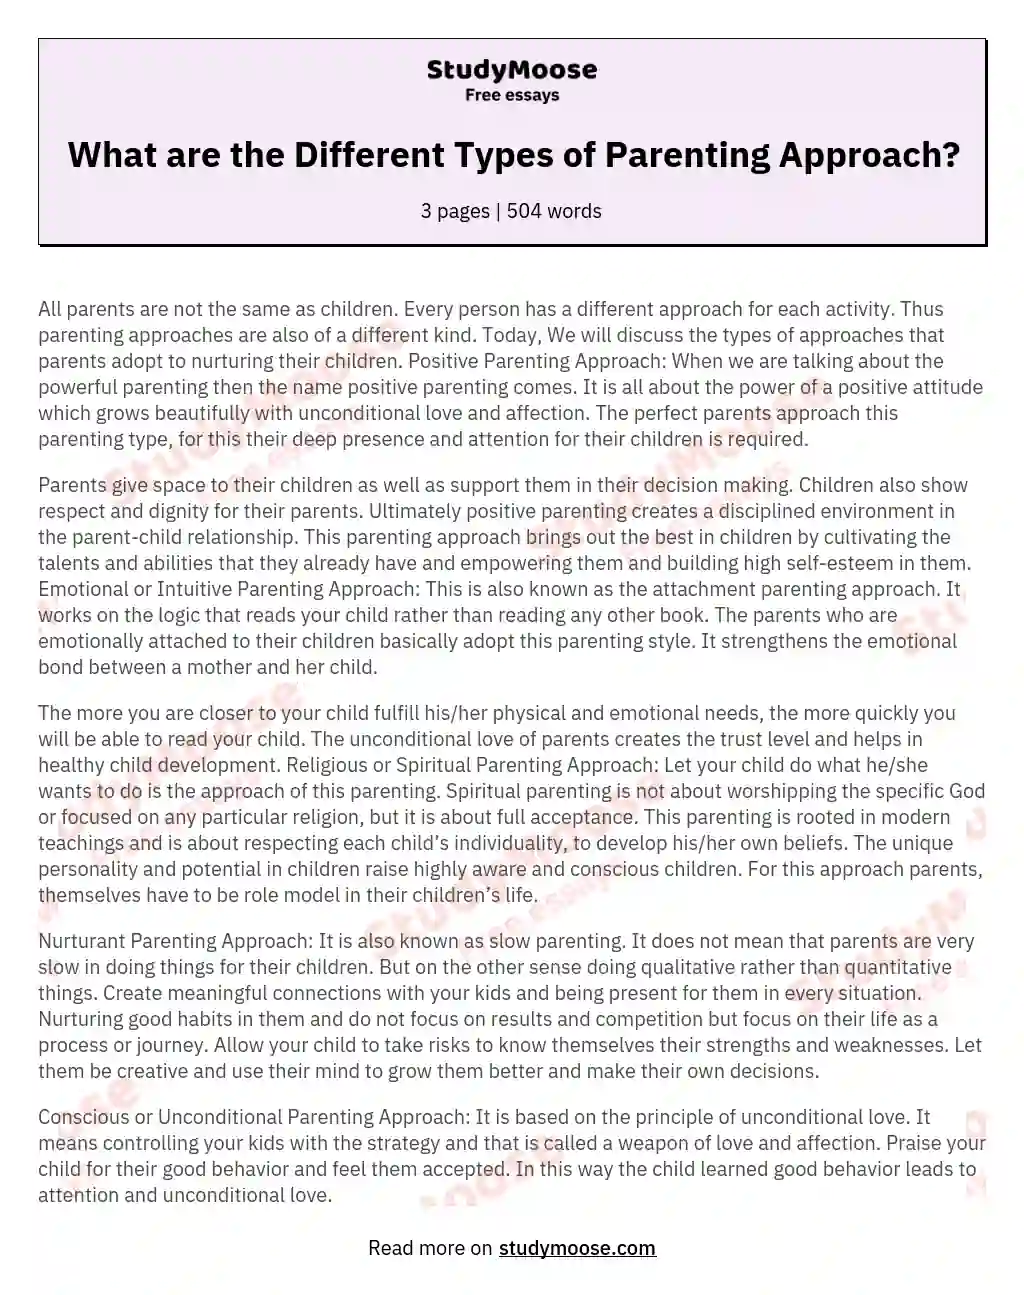 What are the Different Types of Parenting Approach? essay